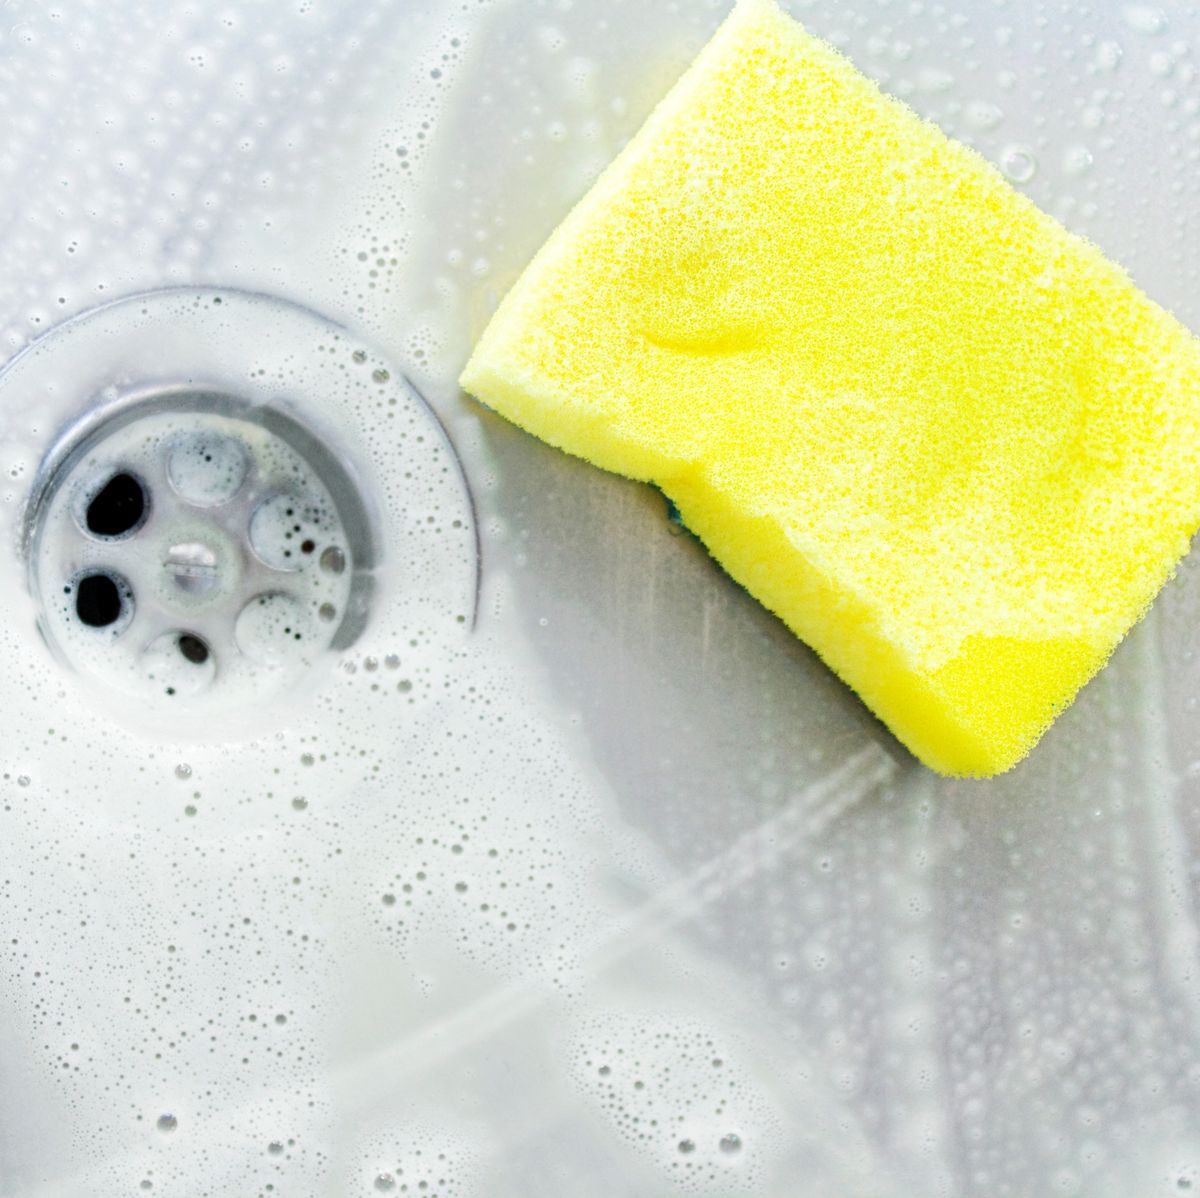 https://hips.hearstapps.com/hmg-prod/images/cleaning-a-sink-with-yellow-sponge-royalty-free-image-1681765892.jpg?crop=0.668xw:1.00xh;0.245xw,0&resize=1200:*